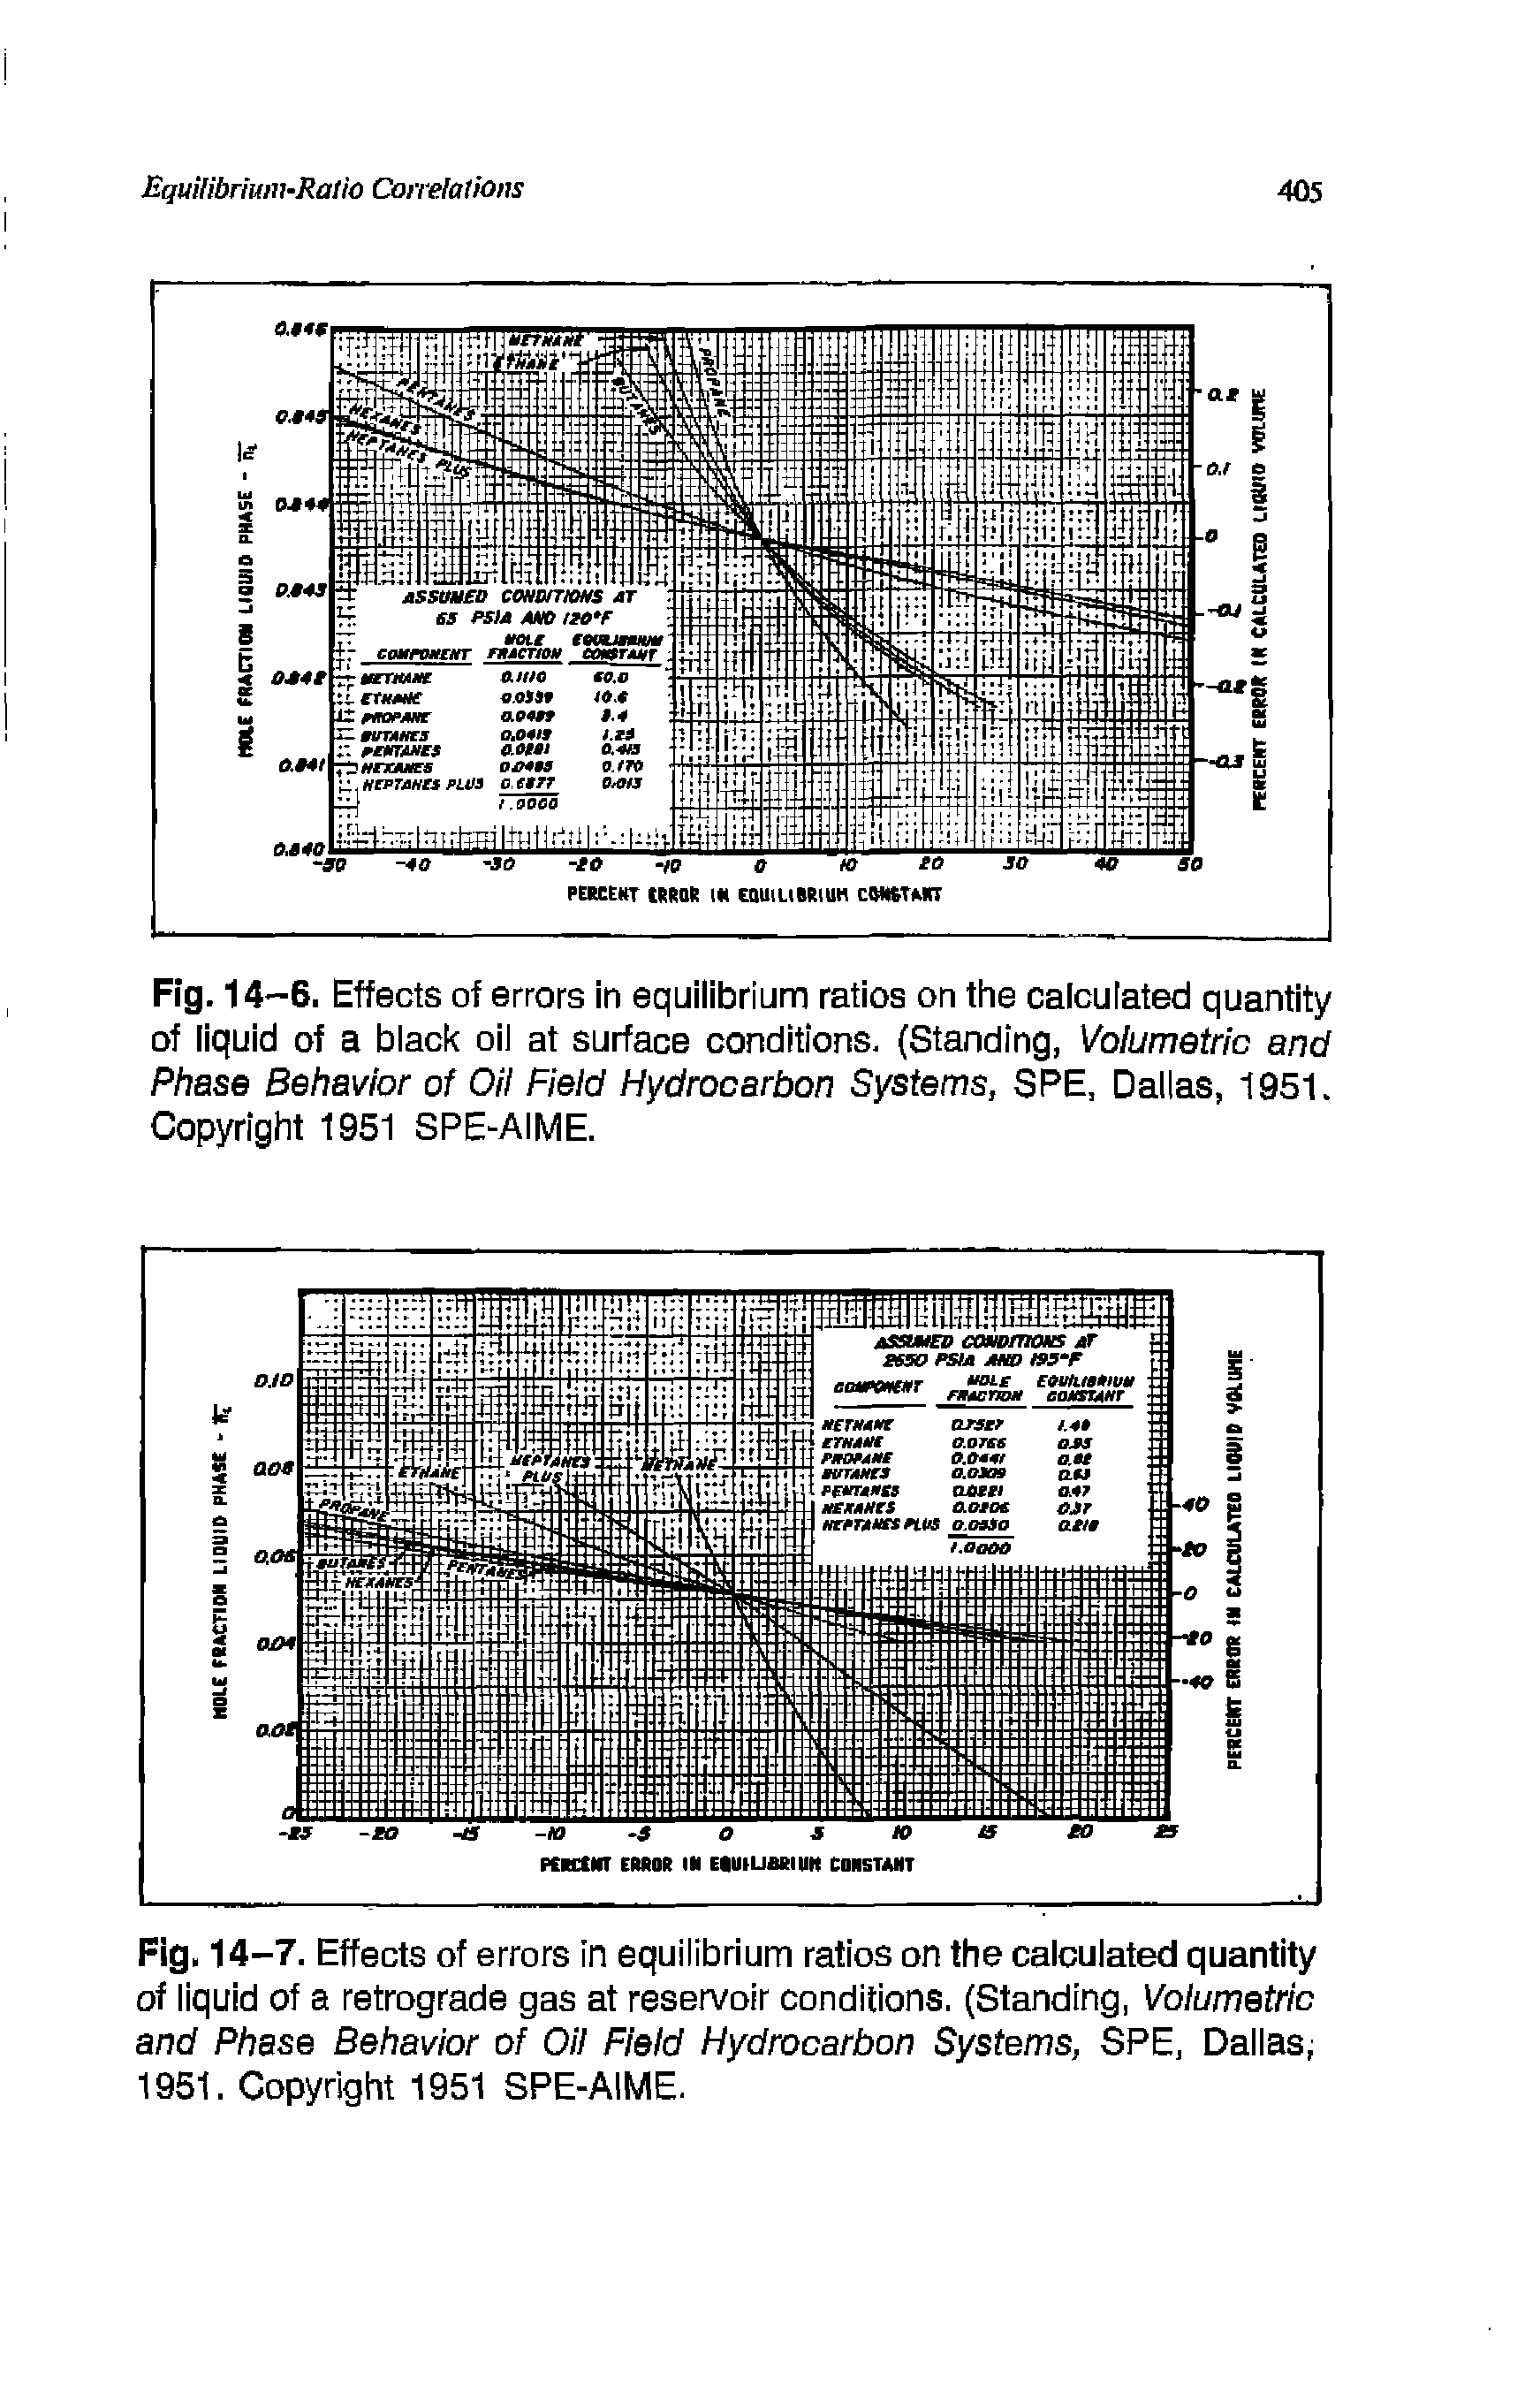 Fig. 14-7. Effects of errors in equilibrium ratios on the calculated quantity of liquid of a retrograde gas at reservoir conditions. (Standing, Volumetric and Phase Behavior of Oil Field Hydrocarbon Systems, SPE, Dallas, 1951. Copyright 1951 SPE-AIME.